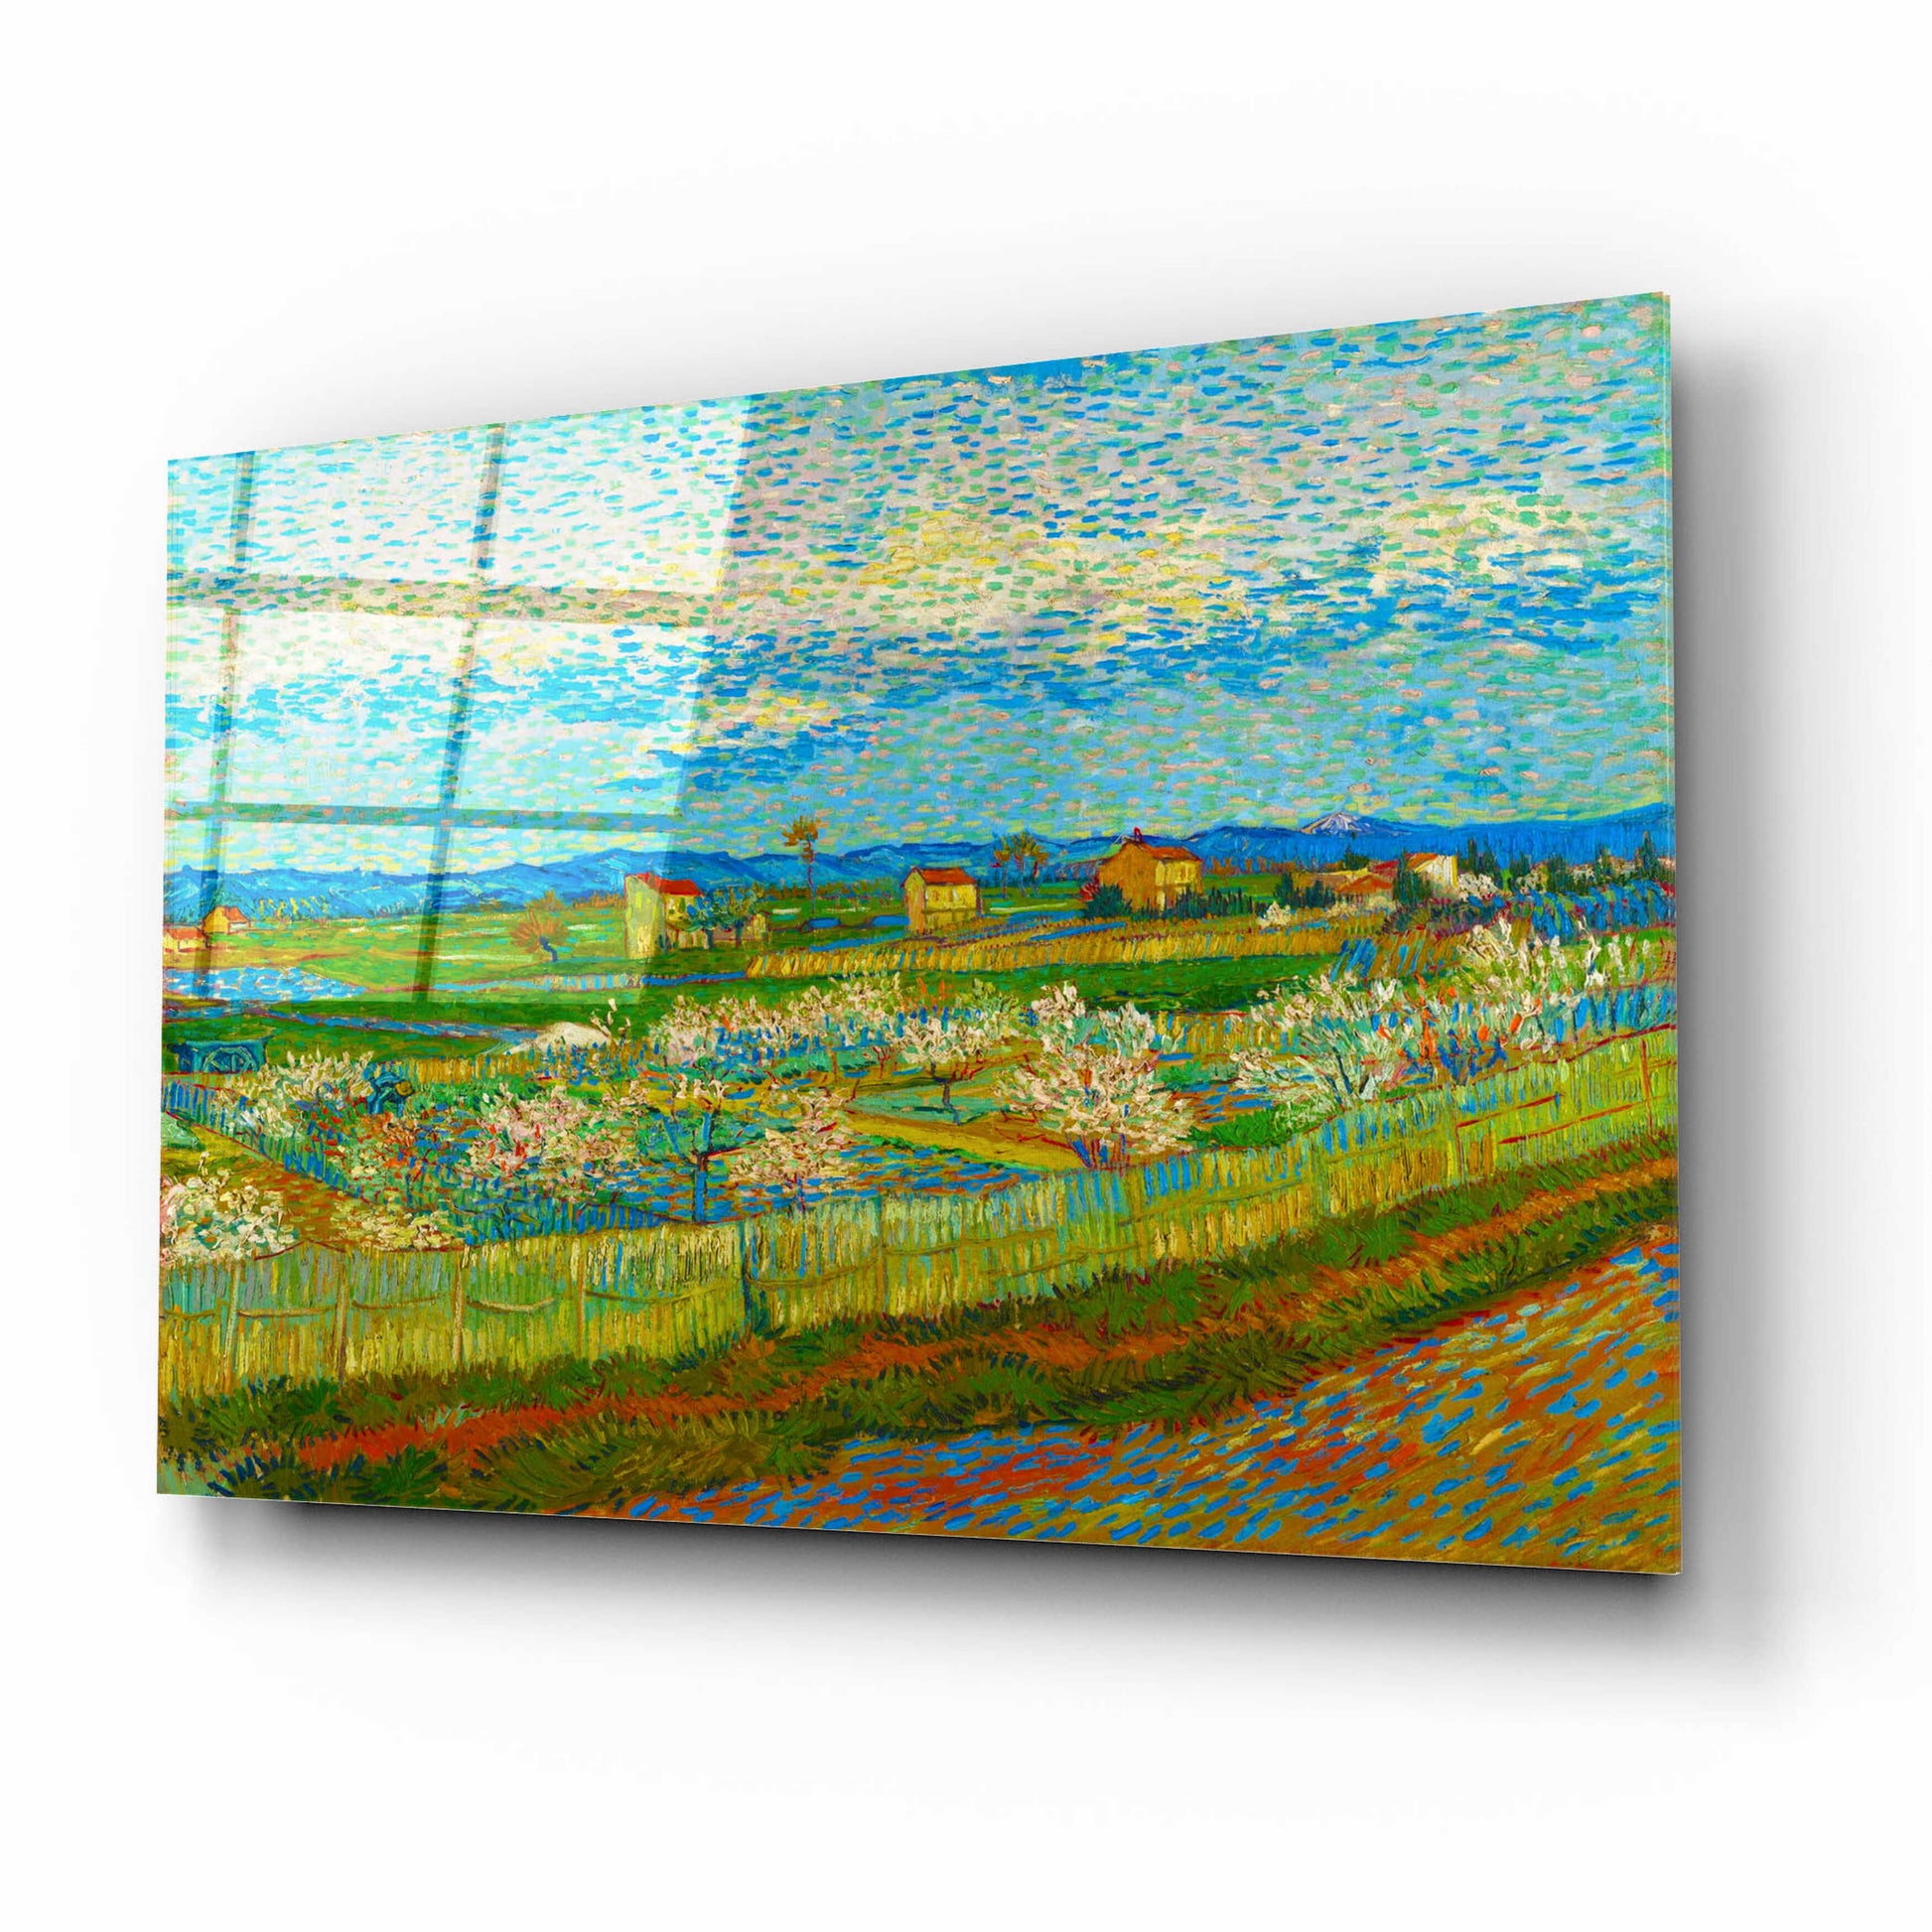 Epic Art 'Peach Trees In Blossom' by Vincent Van Gogh, Acrylic Glass Wall Art,16x12